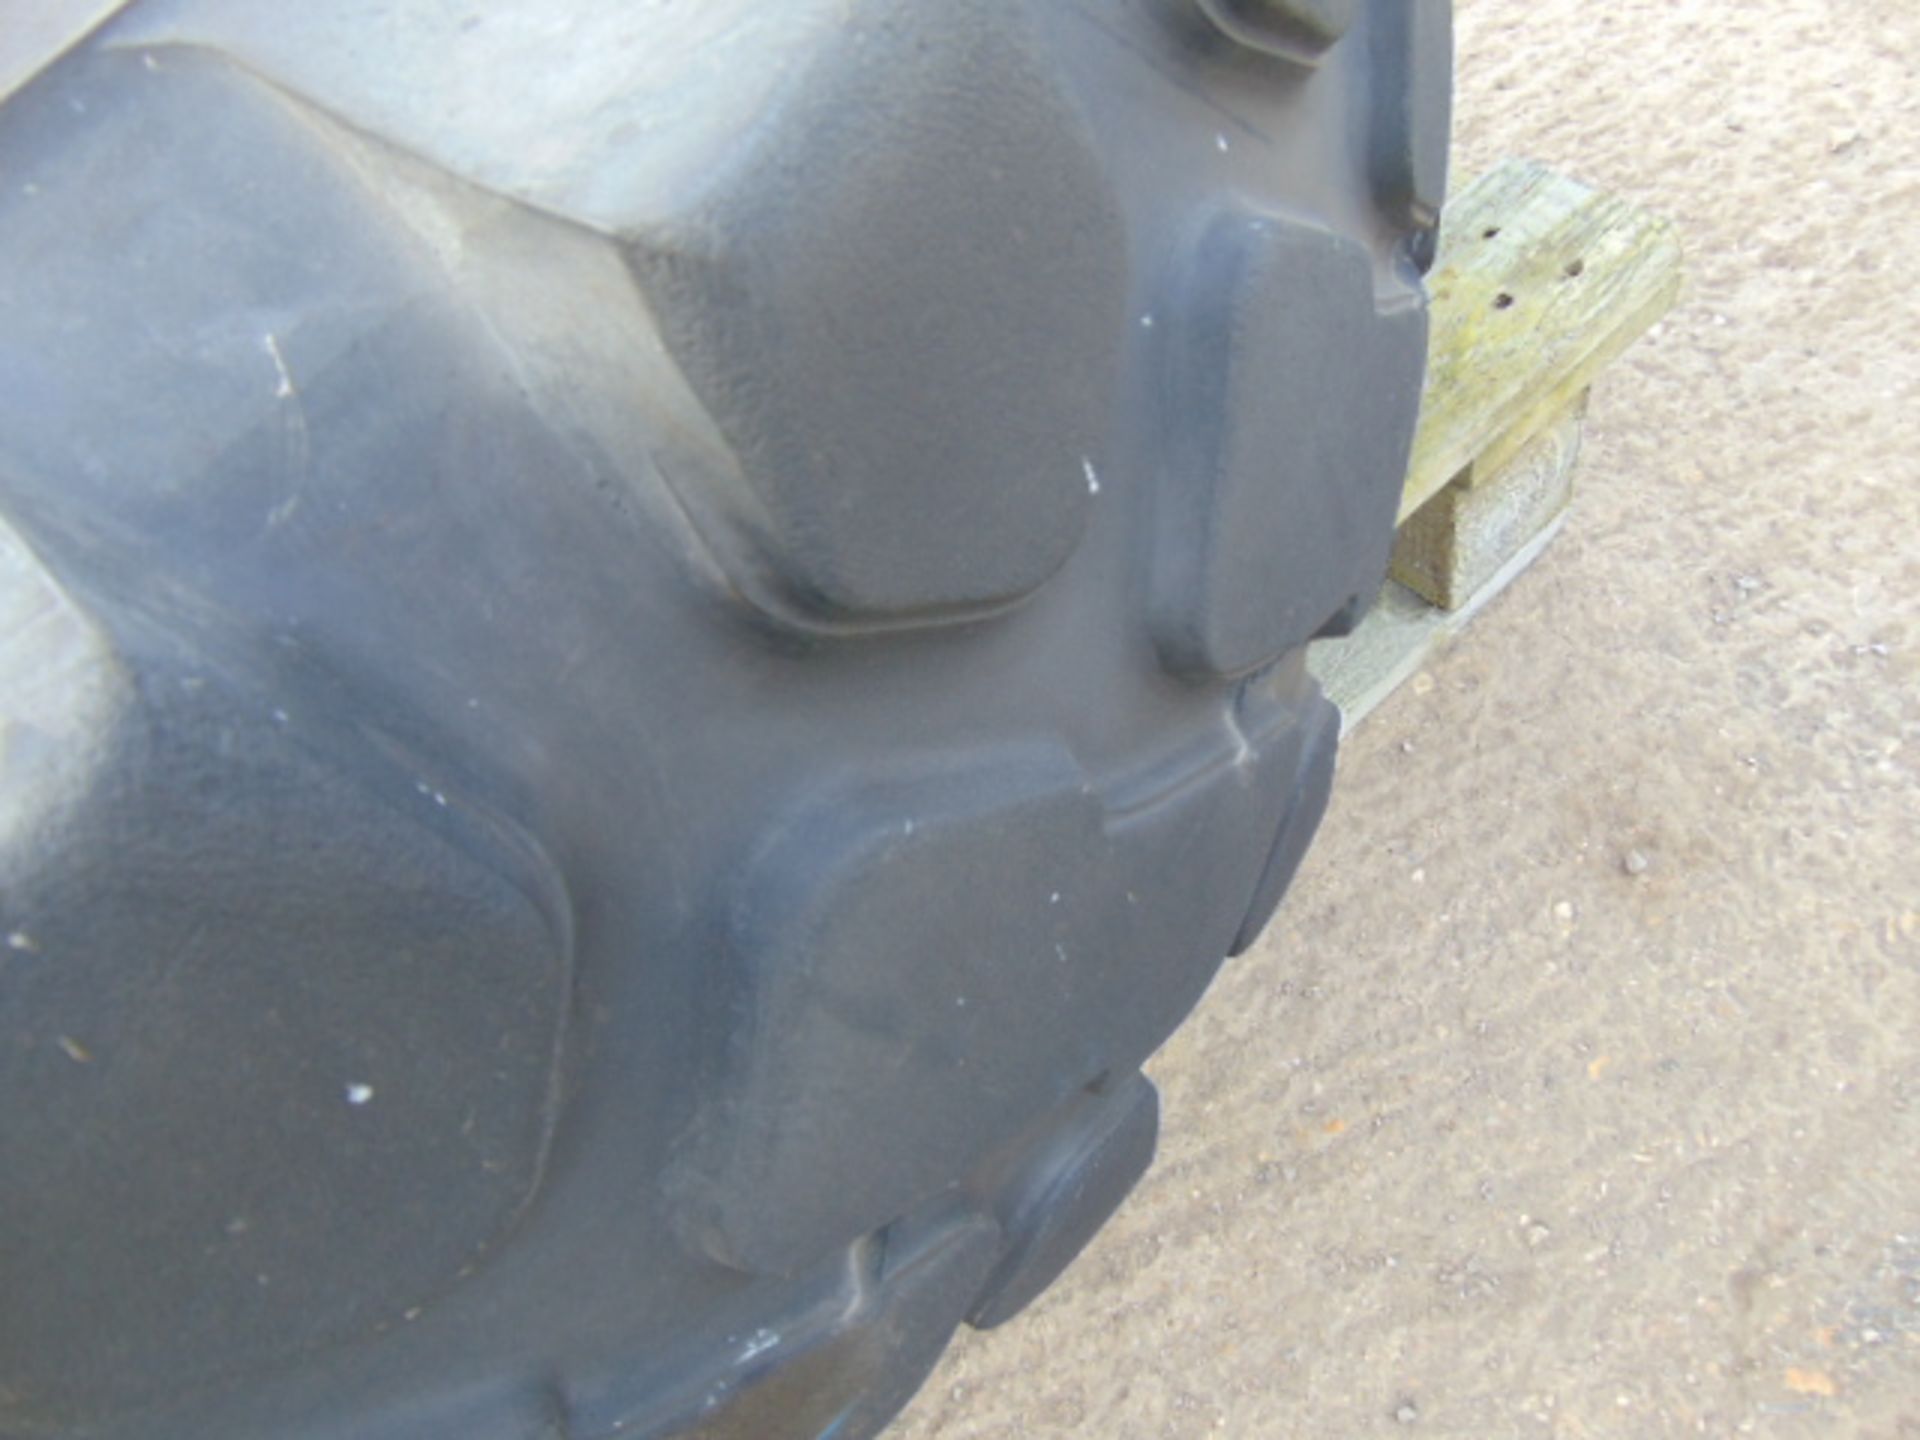 1 x Solideal Load Master 15.5-23 L3 Tyre C/W 5 Stud Rim - Image 3 of 6